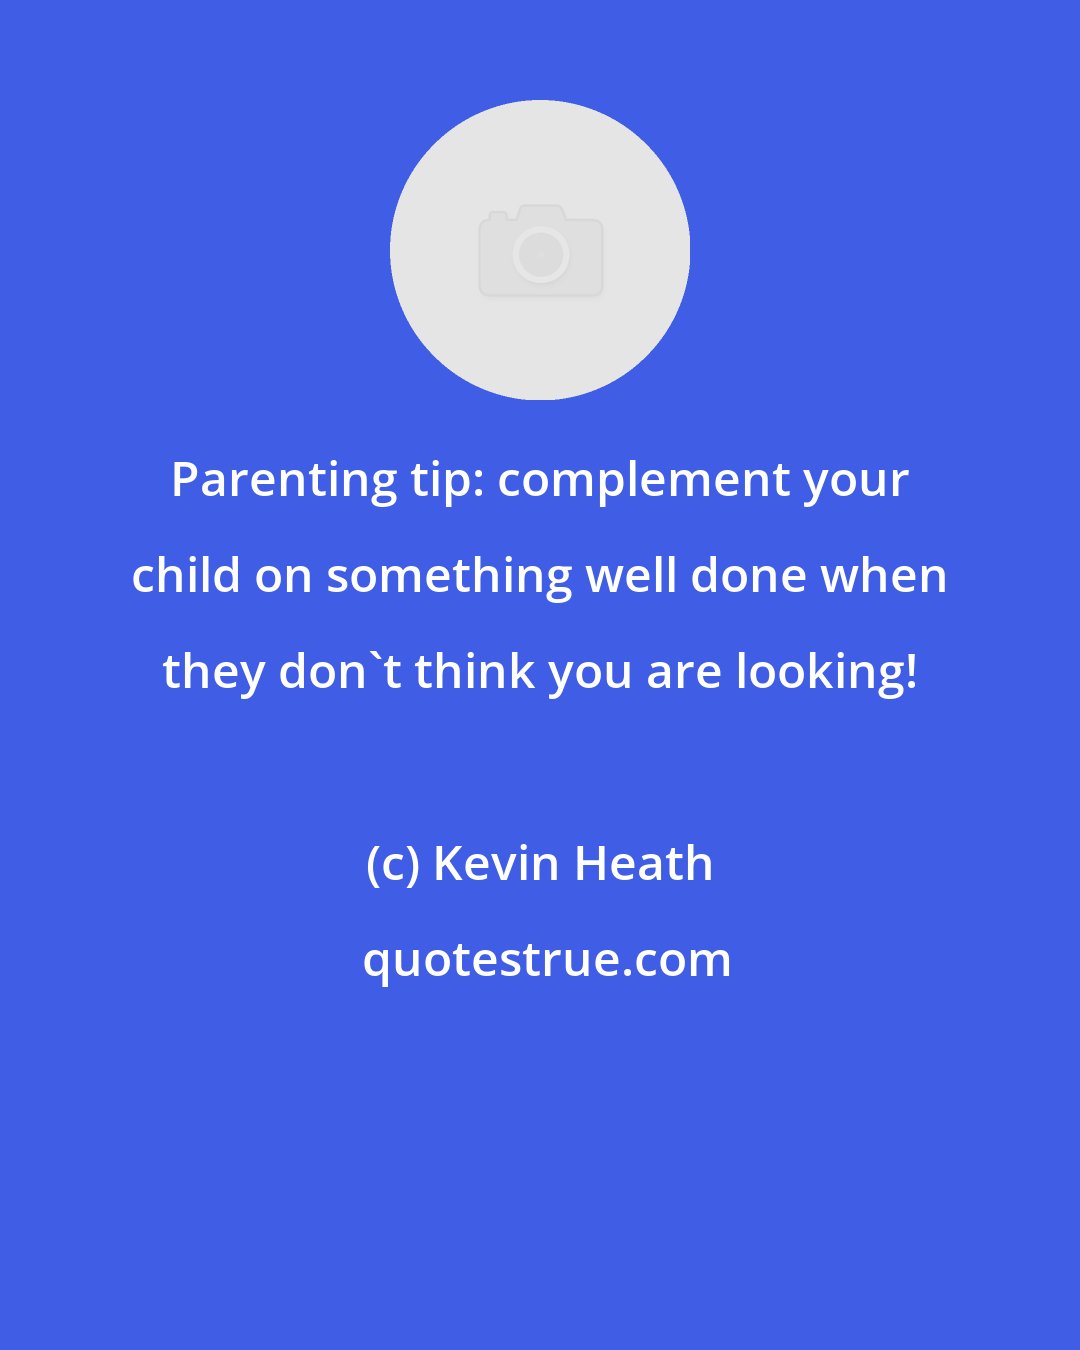 Kevin Heath: Parenting tip: complement your child on something well done when they don't think you are looking!